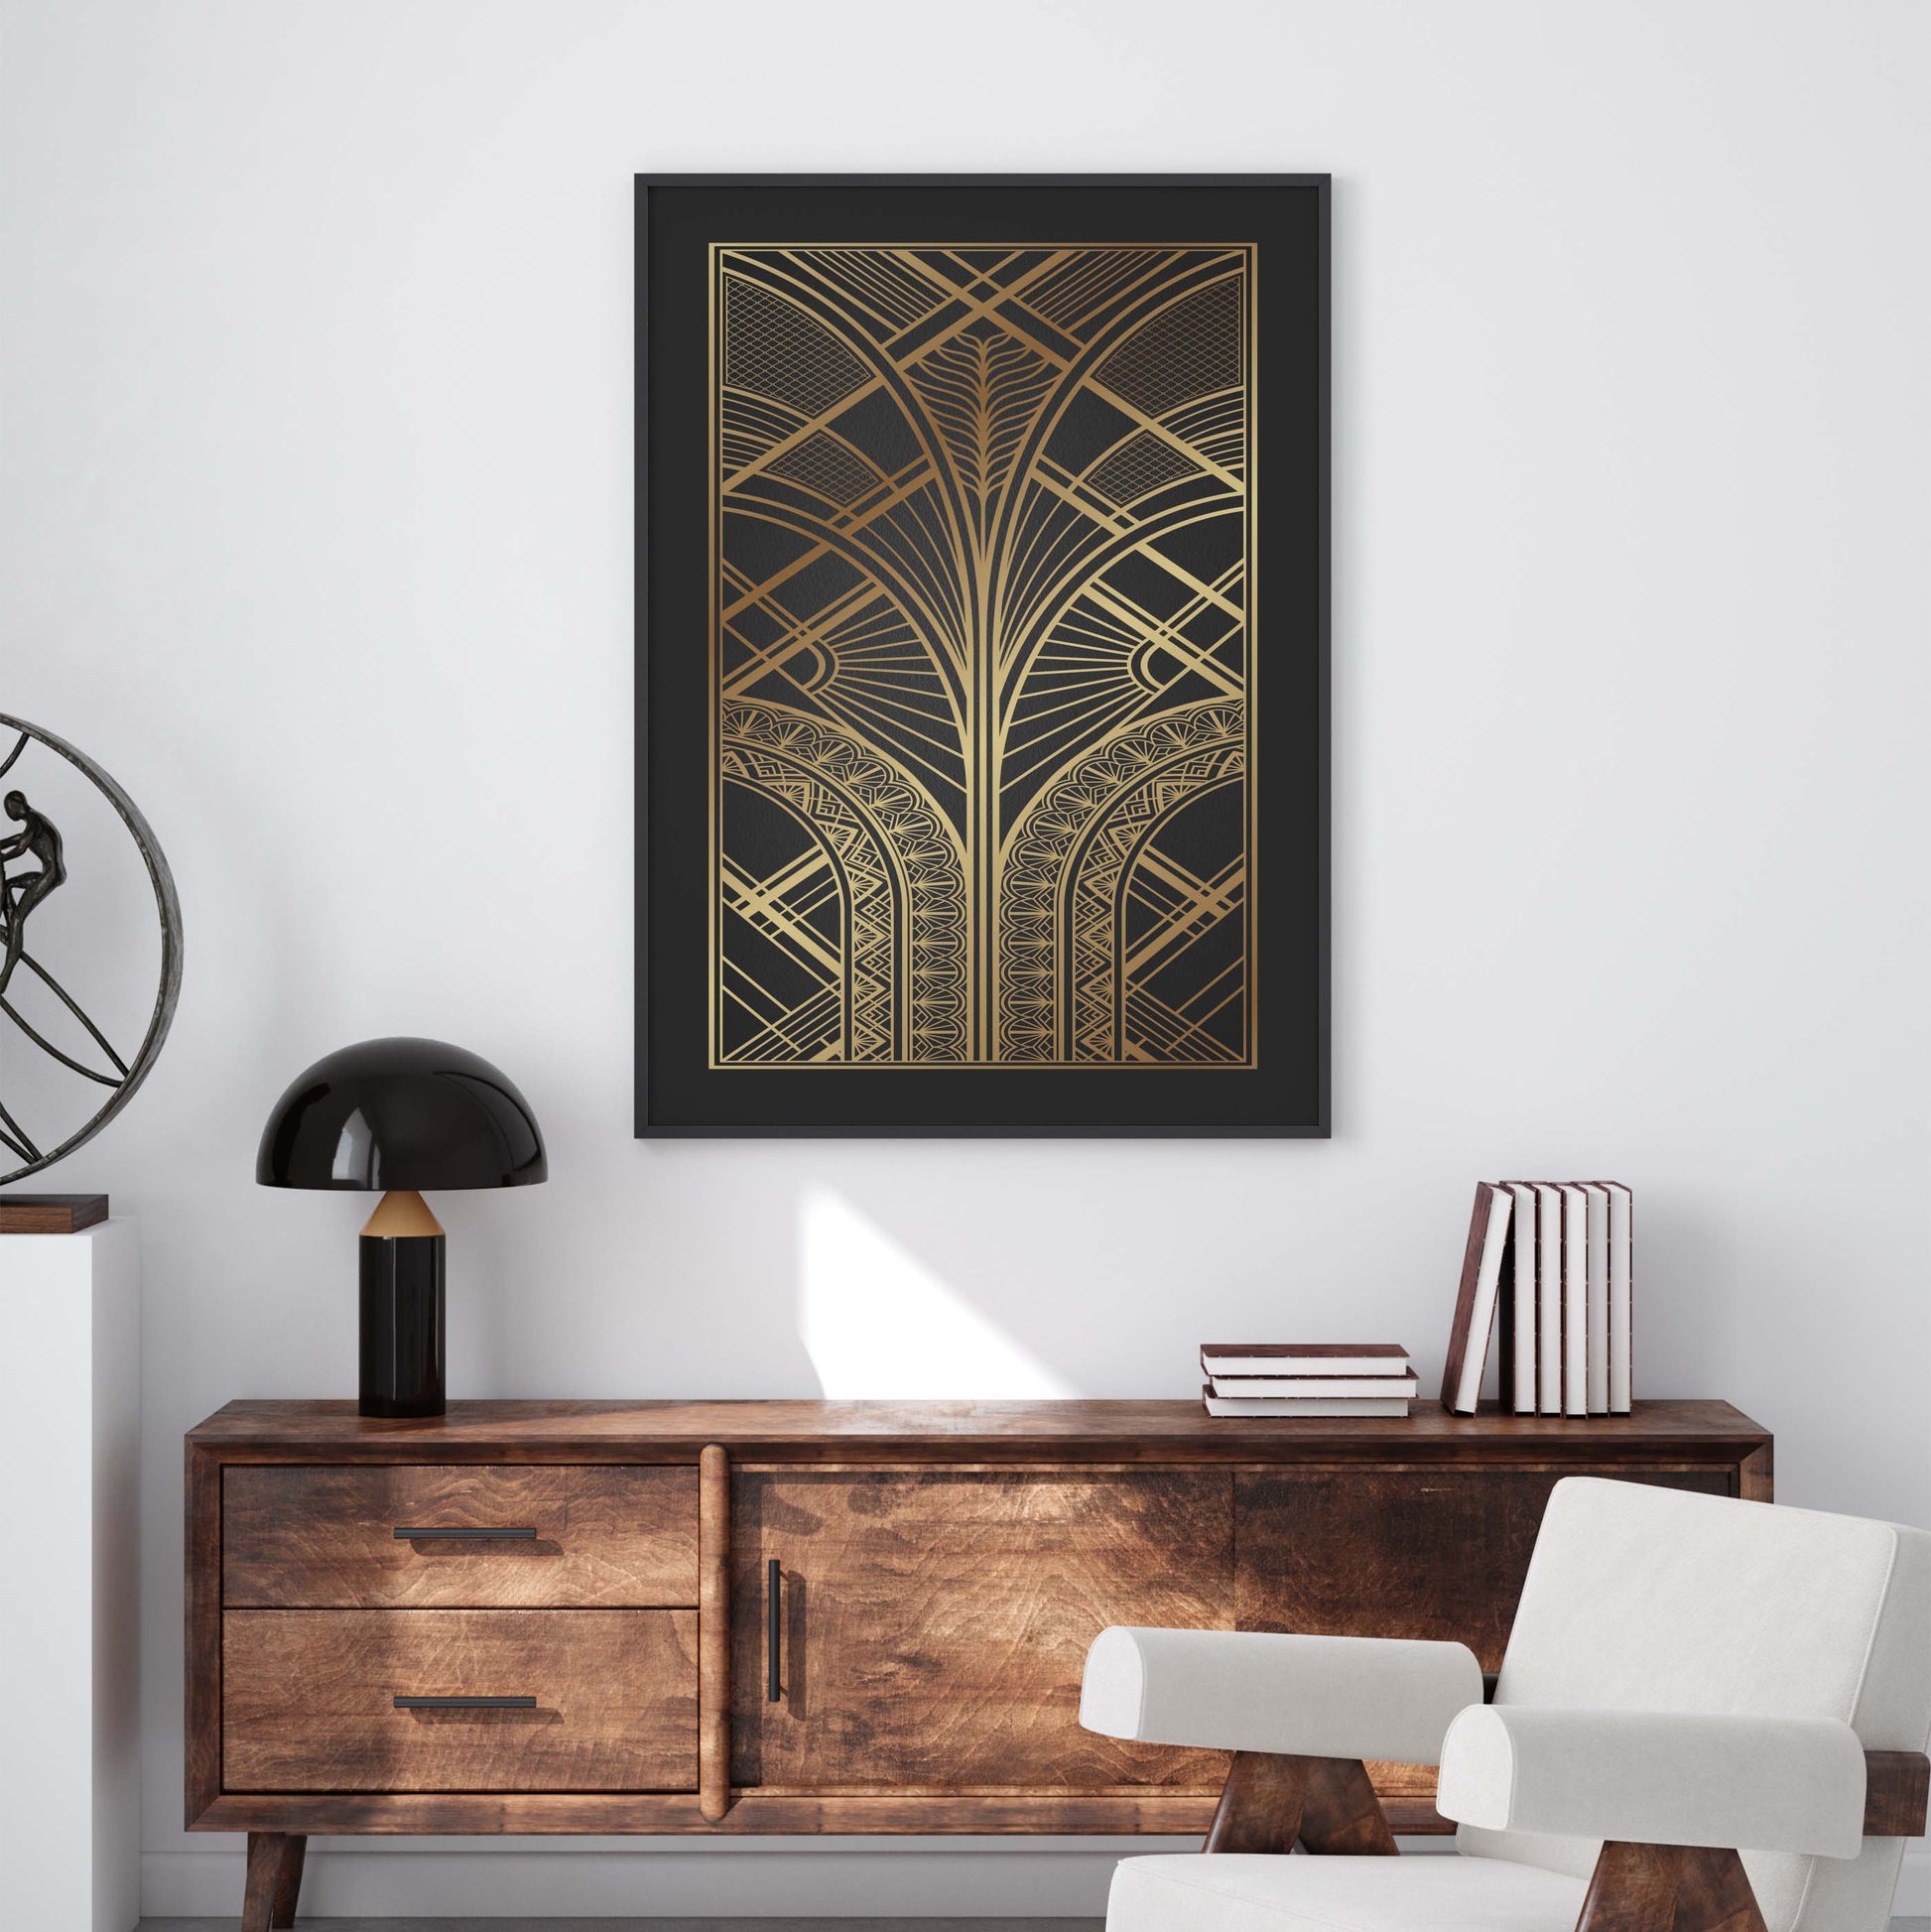 Black and gold art deco print with geometric pattern